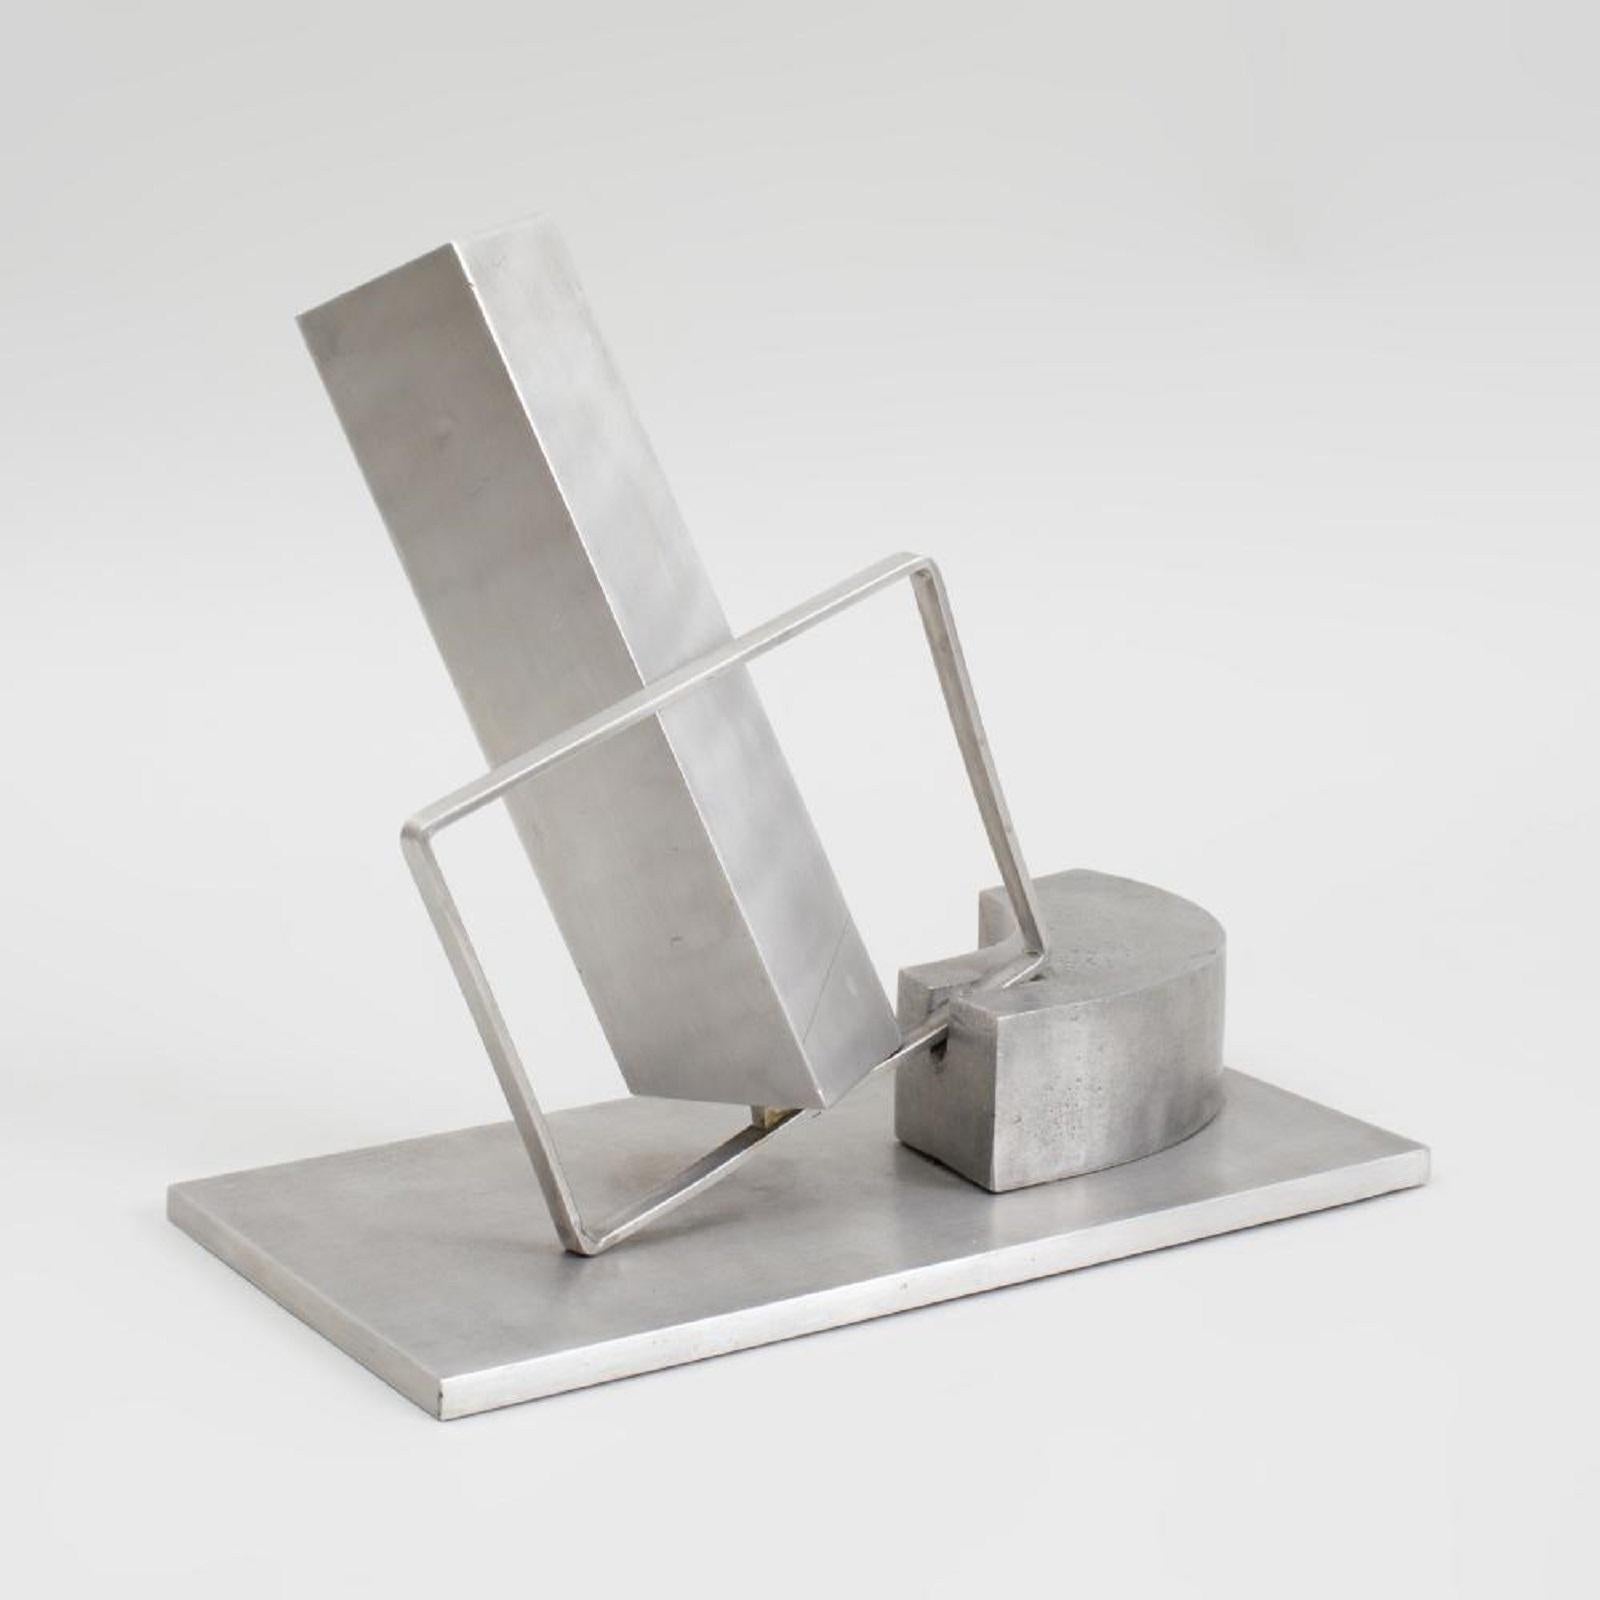 Beautiful table top sculpture by renowned Israeli sculptor Menashe Kadishman. Super quality, and visually stunning. There is a large version from this series in the collection of the Hirshhorn Museum and Sculpture Garden, Smithsonian Institution,